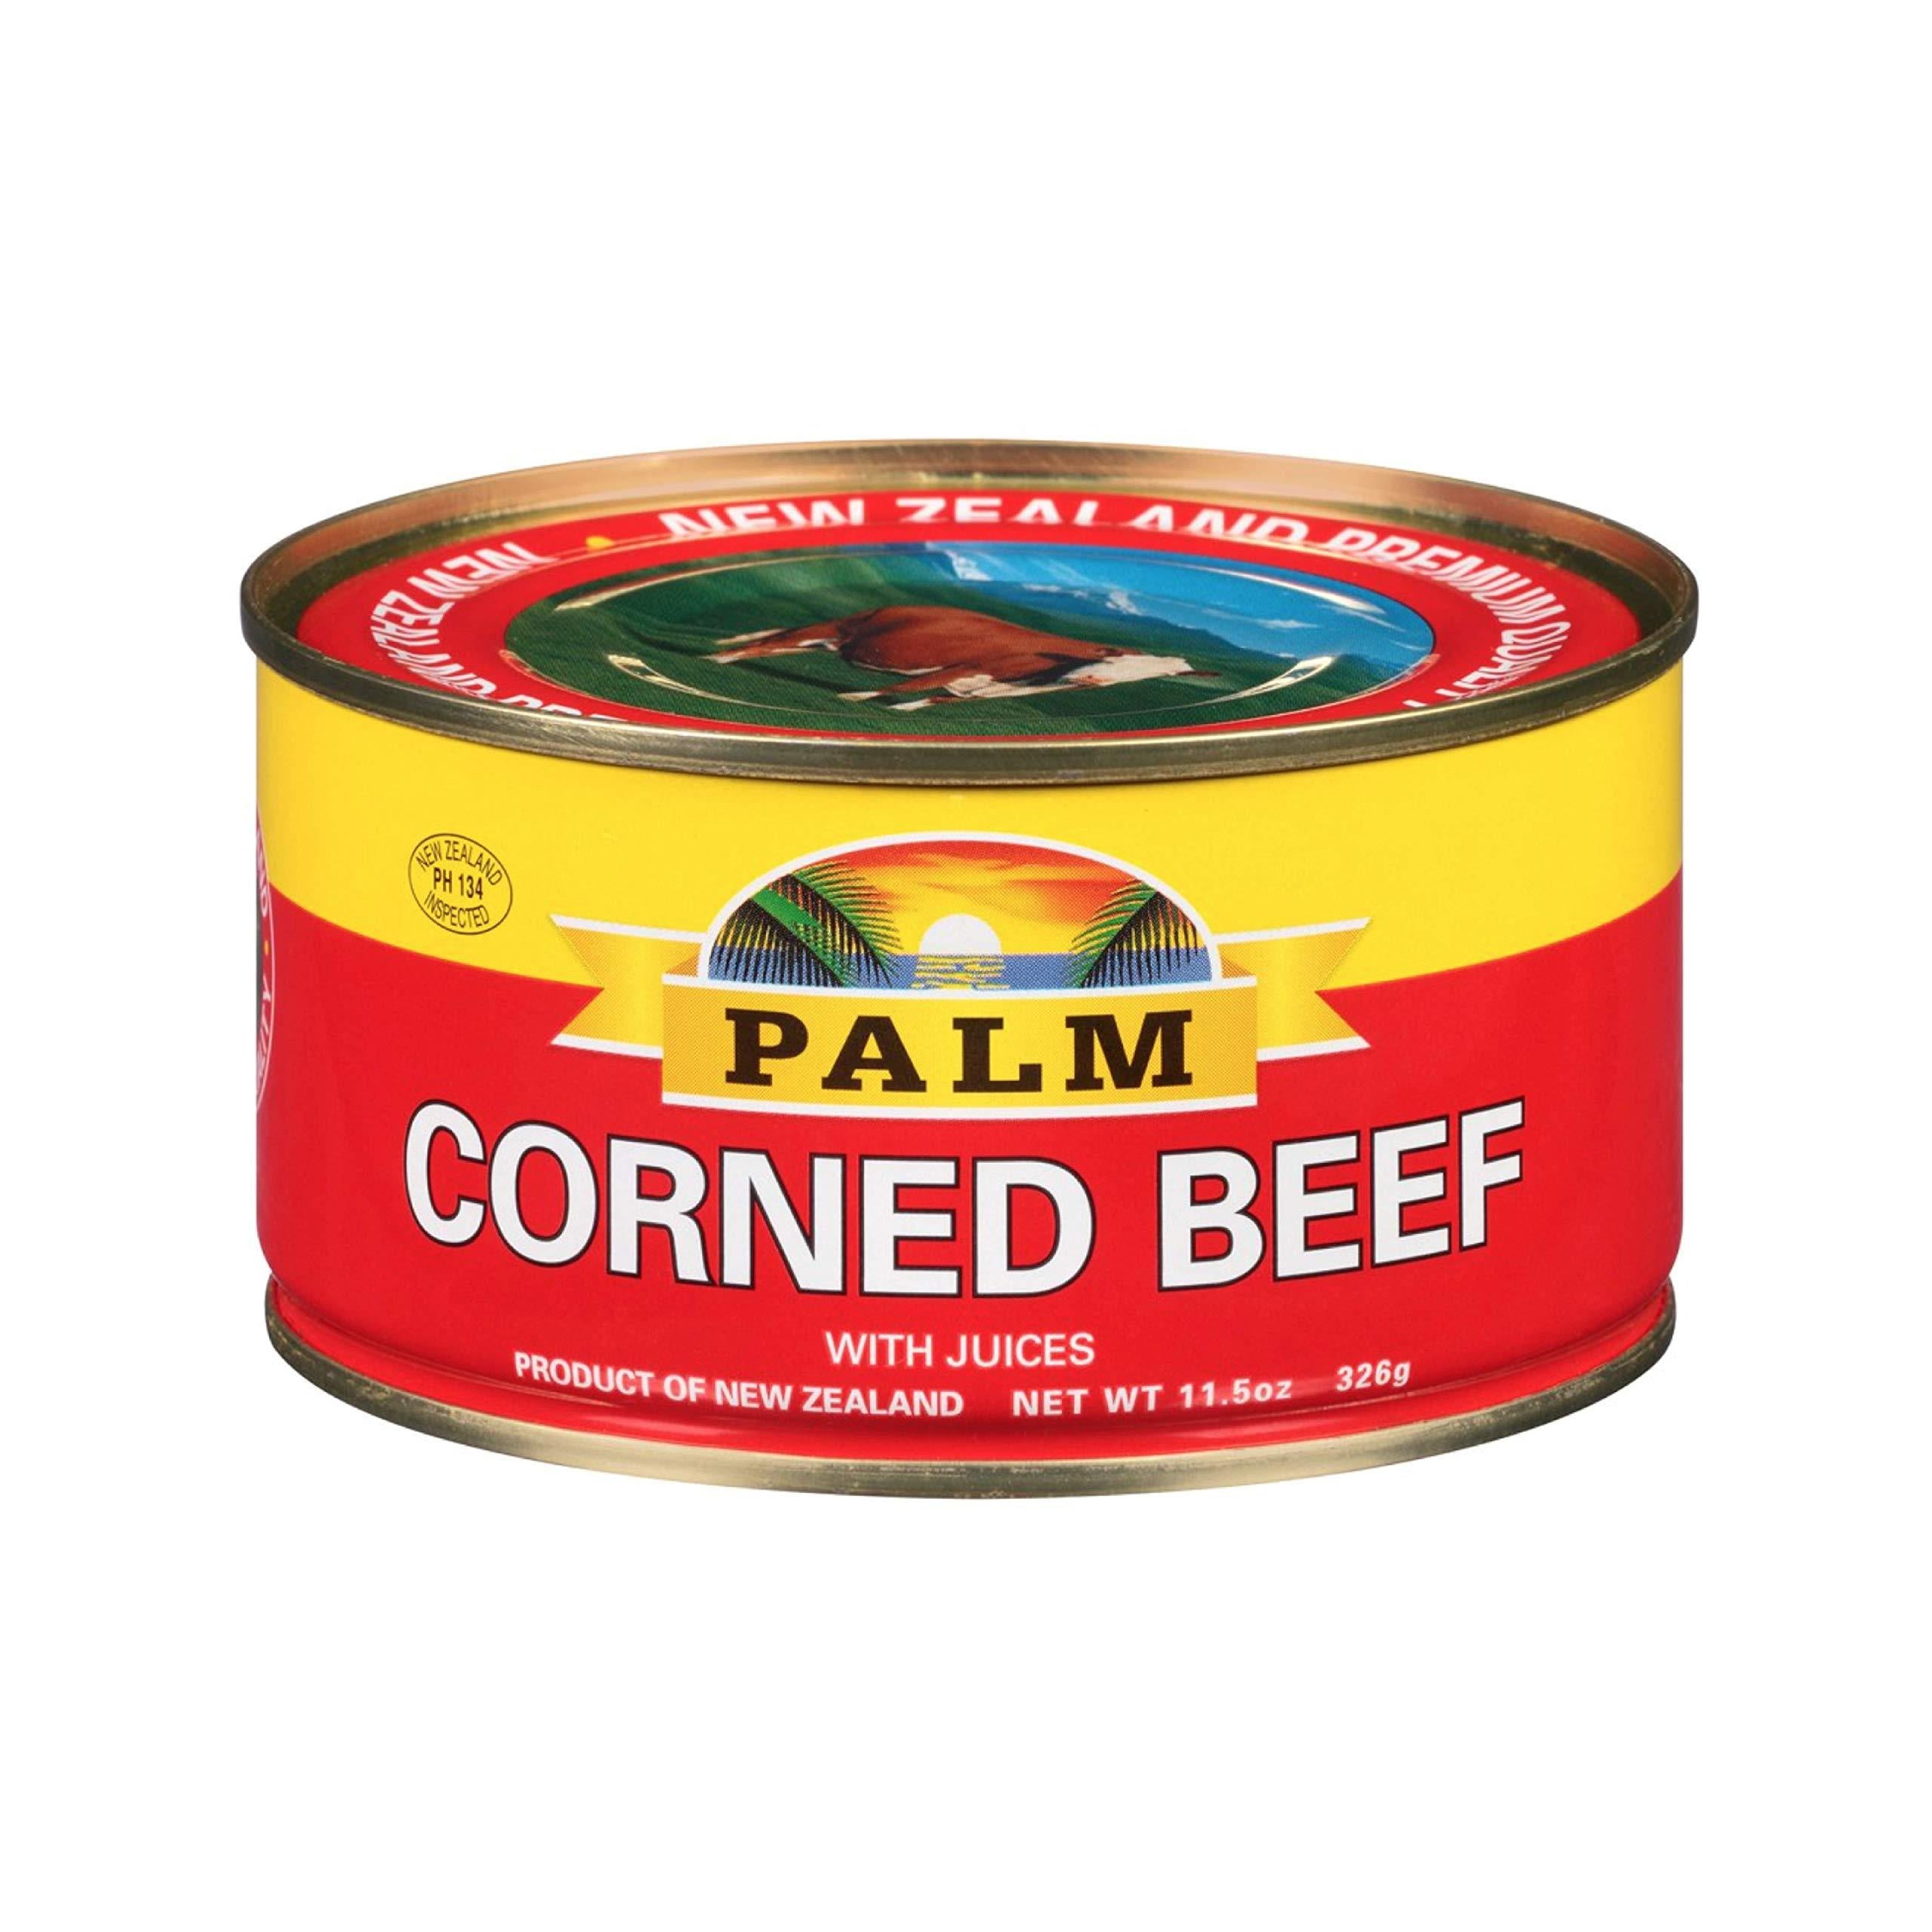 (PACK OF 2 CANS) Palm Corned Beef with Juices 11.5 Oz. Can